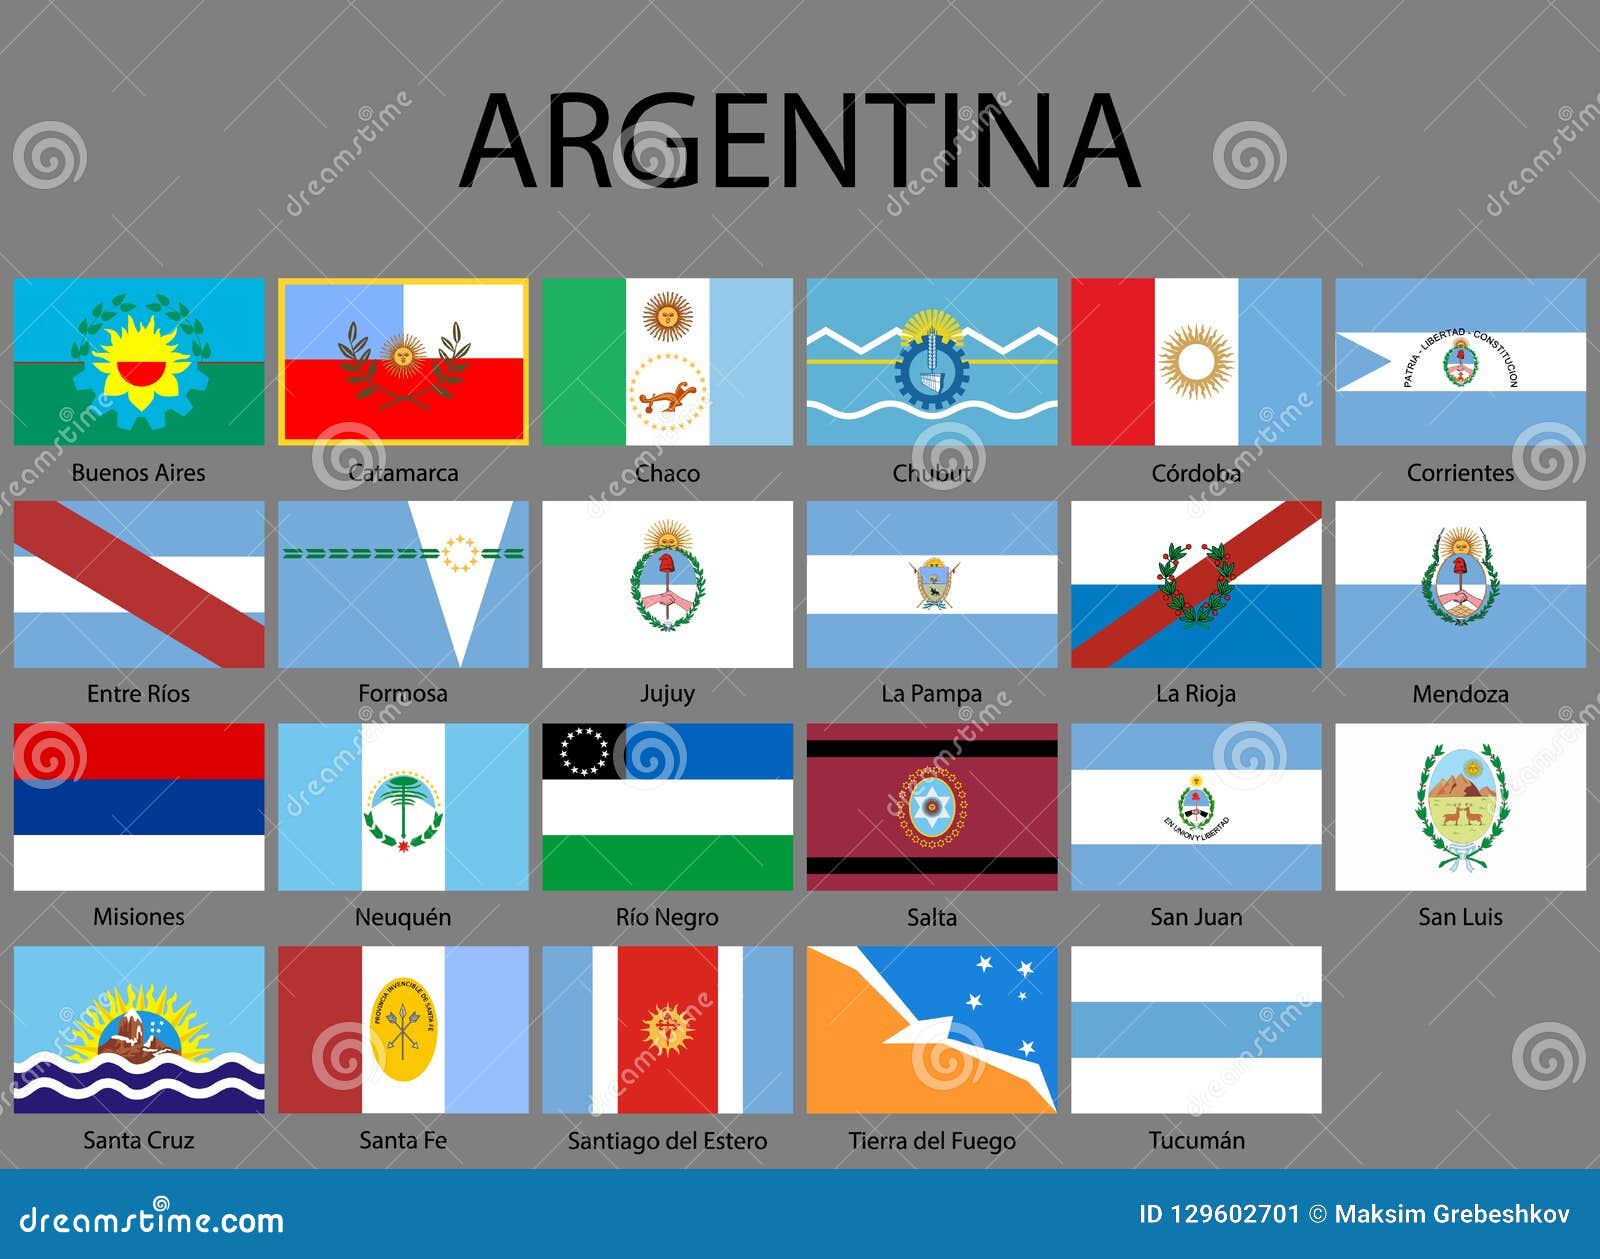 Flags Of Argentina Provinces